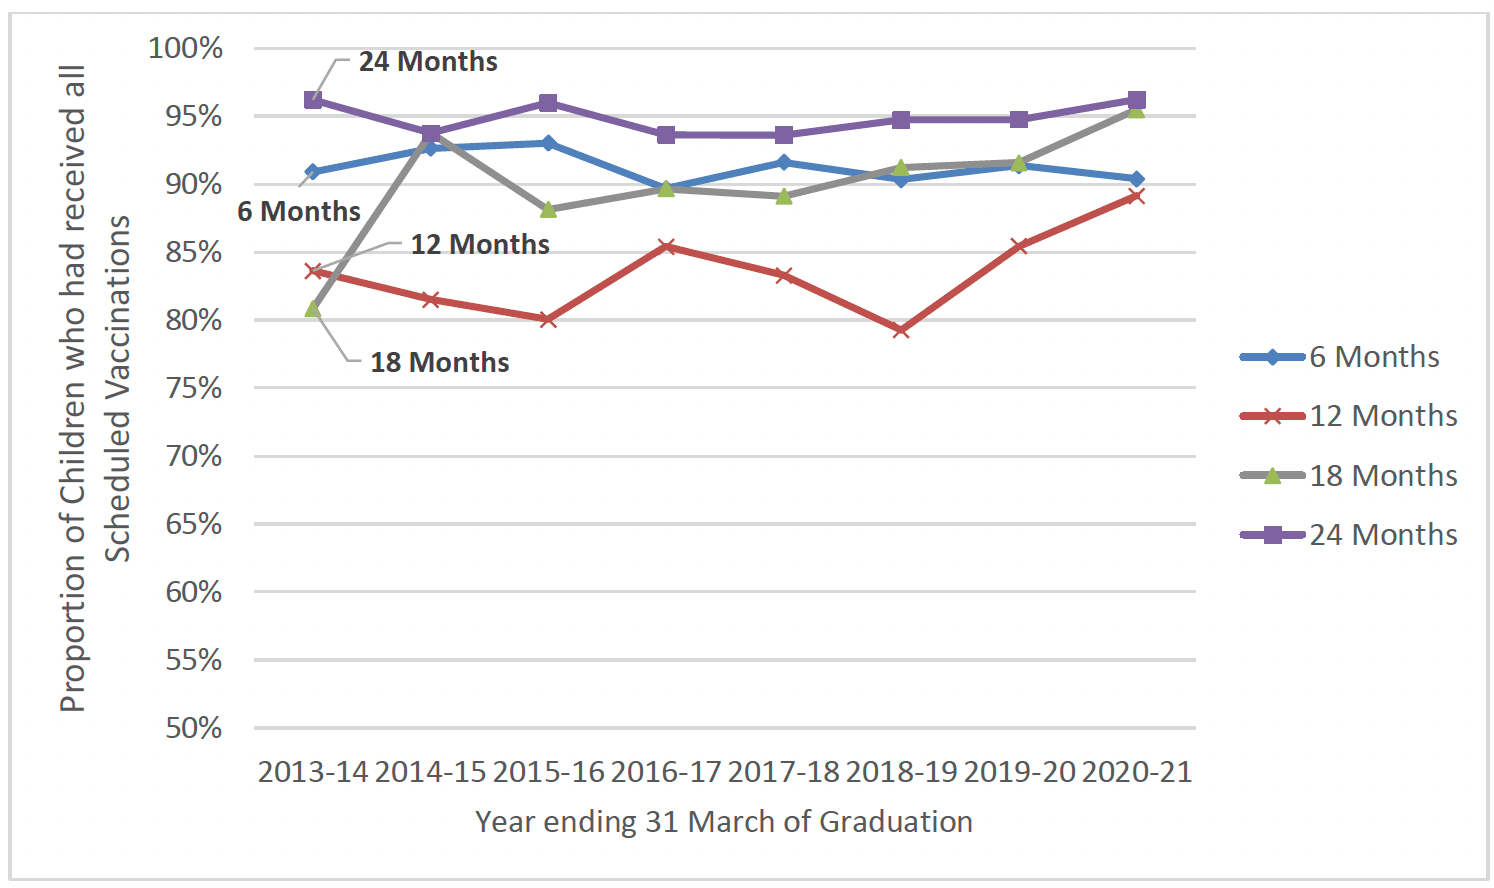 Chart 46 is a line chart showing the proportion of children who had received all scheduled immunisations at 6 months, 12 months, 18 months and 24 months post-birth between 2013-14 and 2020-21. By 24 months post-birth around 95% had received all scheduled immunisations each year.